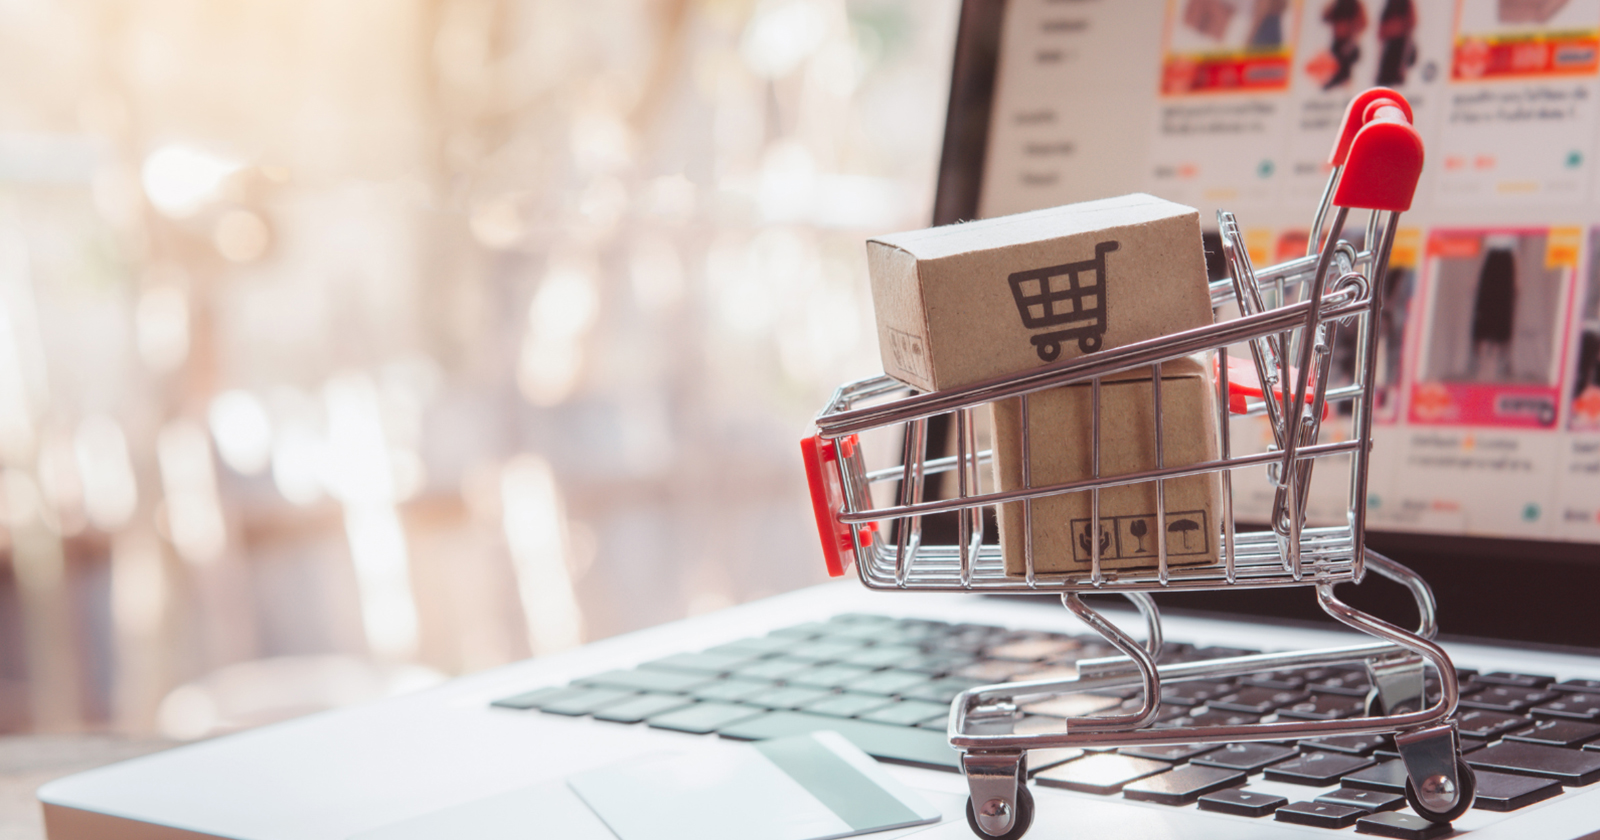 10 Ecommerce Tips To Reduce Abandoned Carts & Boost Sales